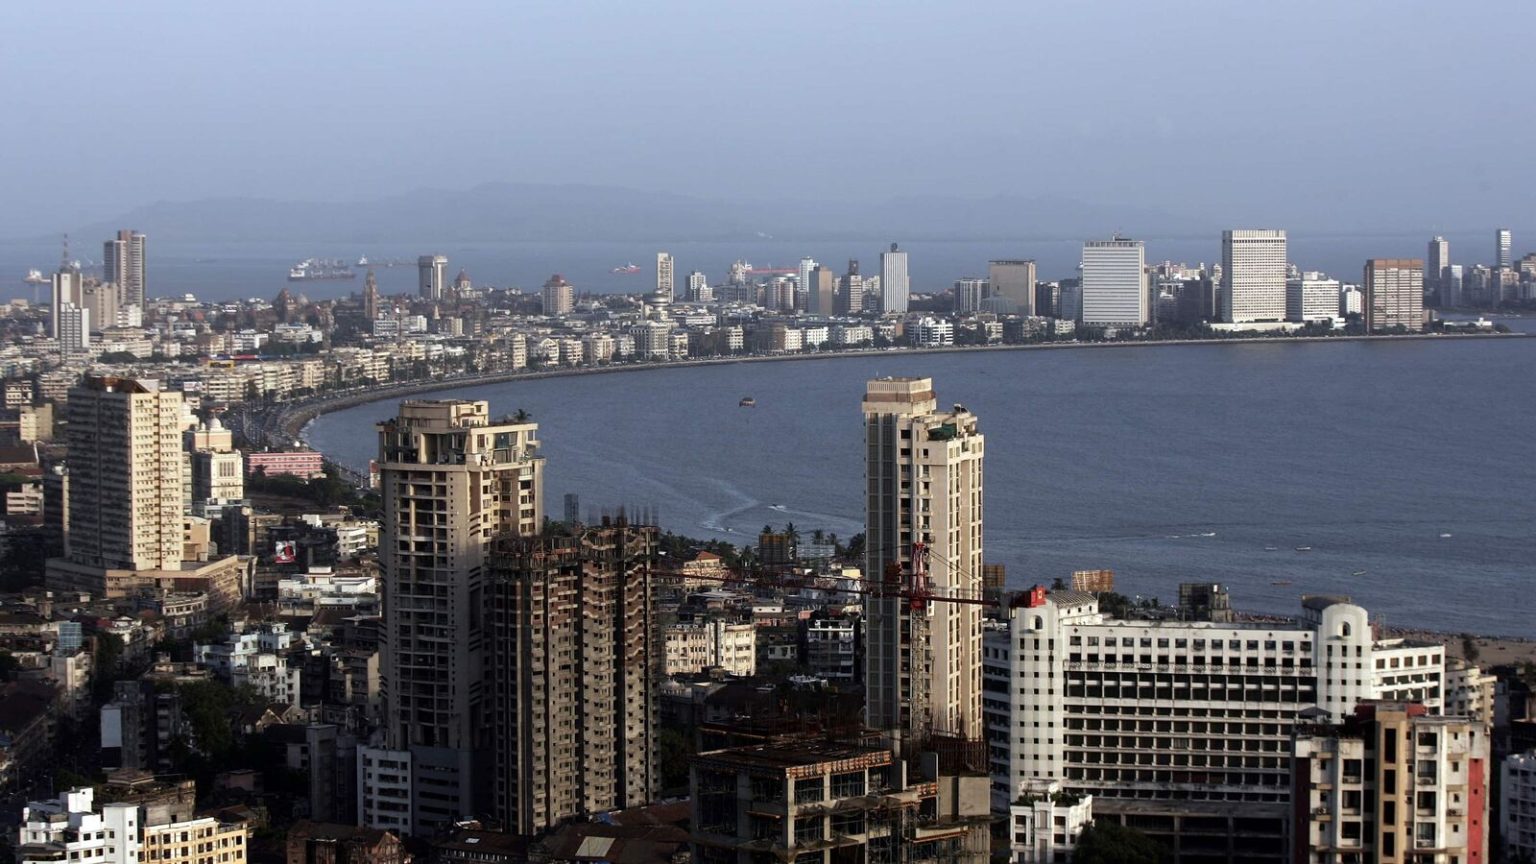 Mumbai: The Most Expensive City to Live in